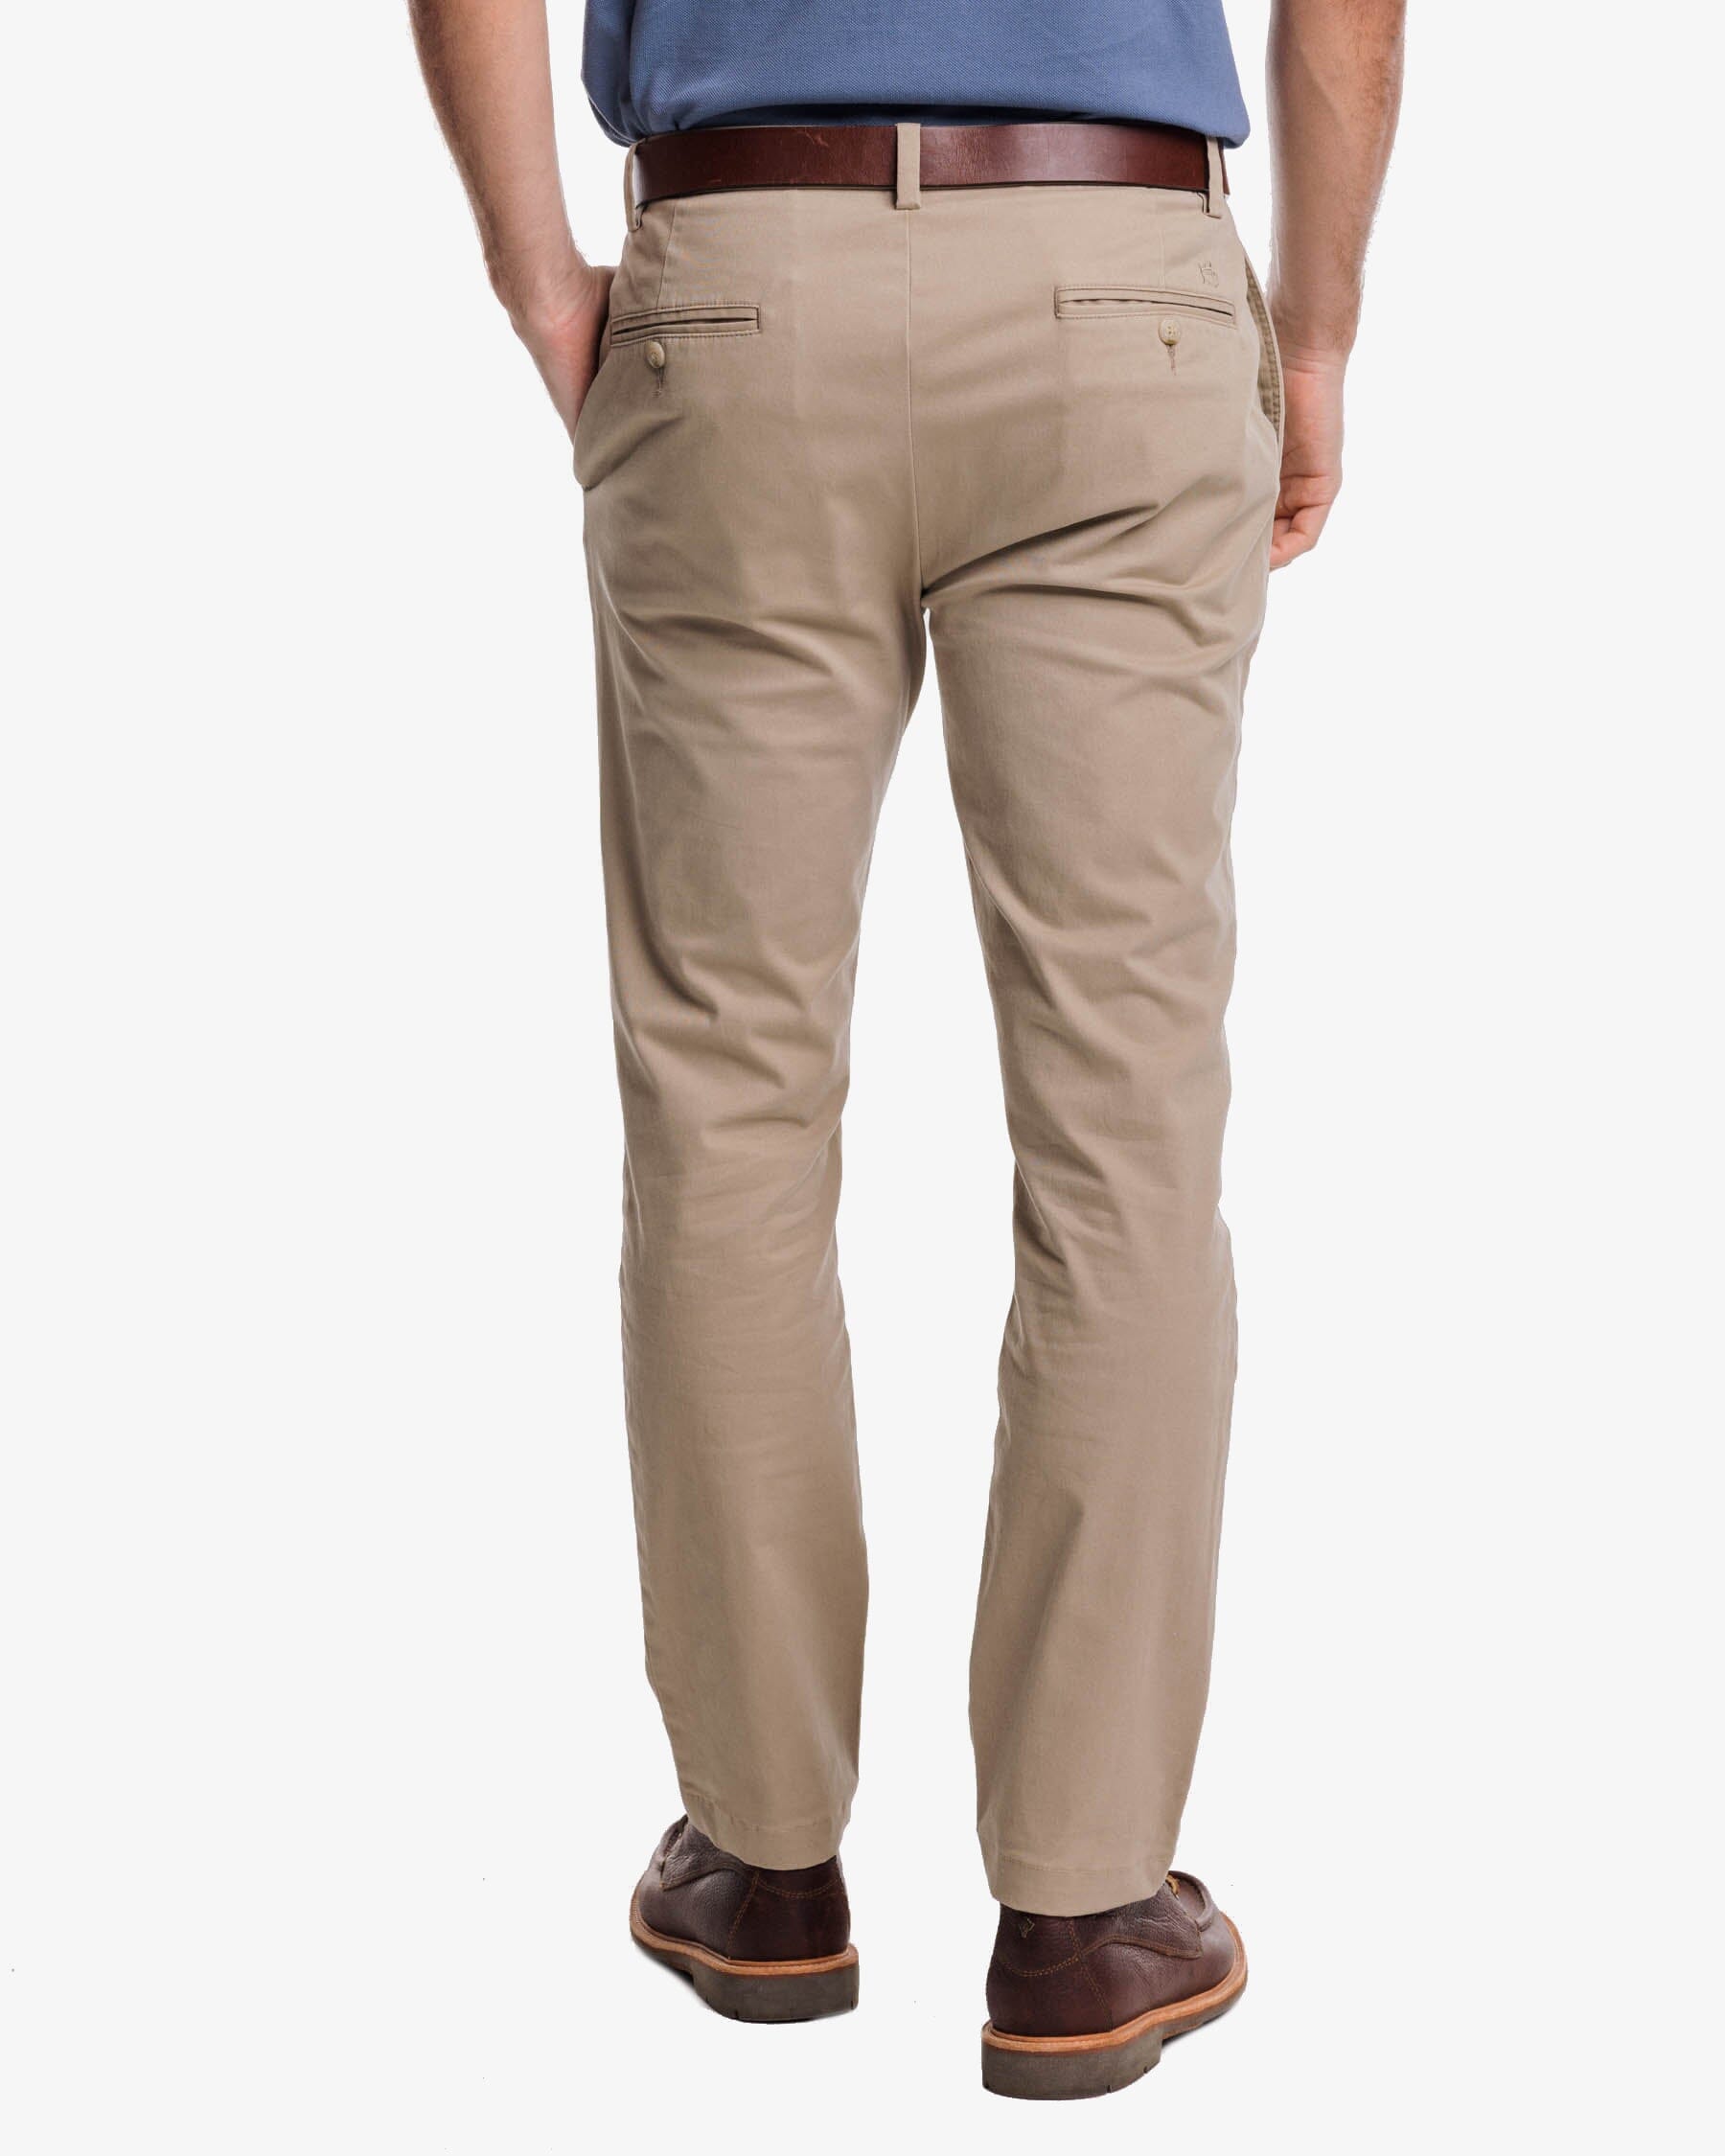 Men's Channel Marker Chino Pant in Khaki | Southern Tide